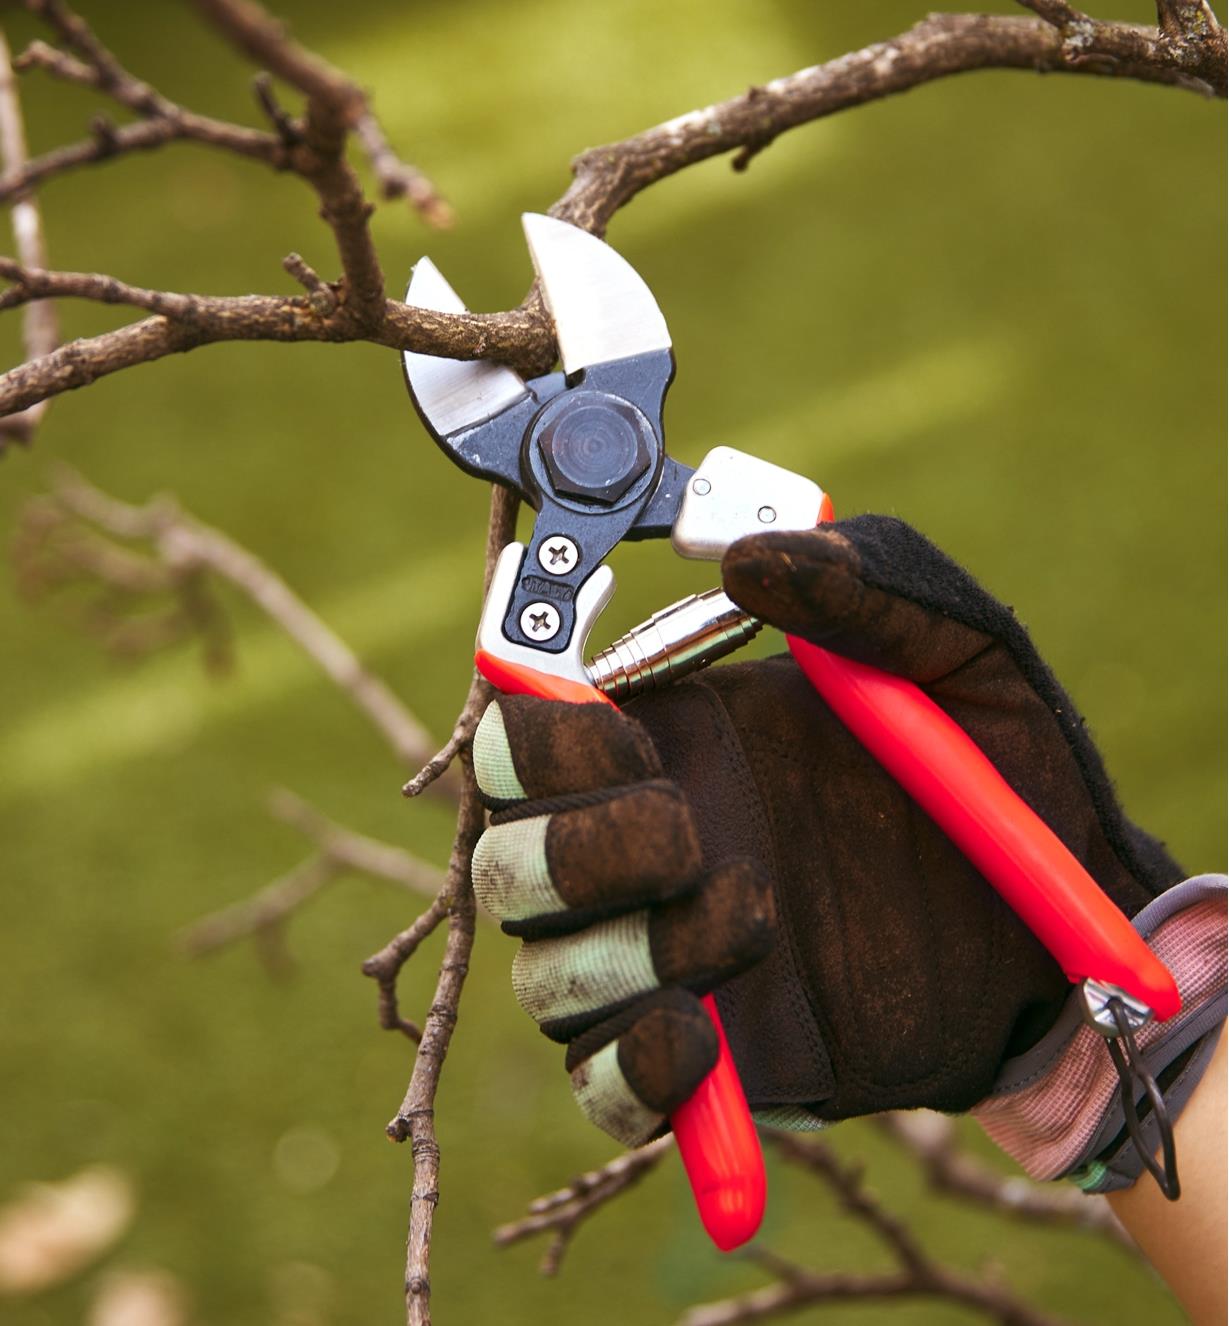 Cutting a woody branch with the Castellari double-bladed pruner